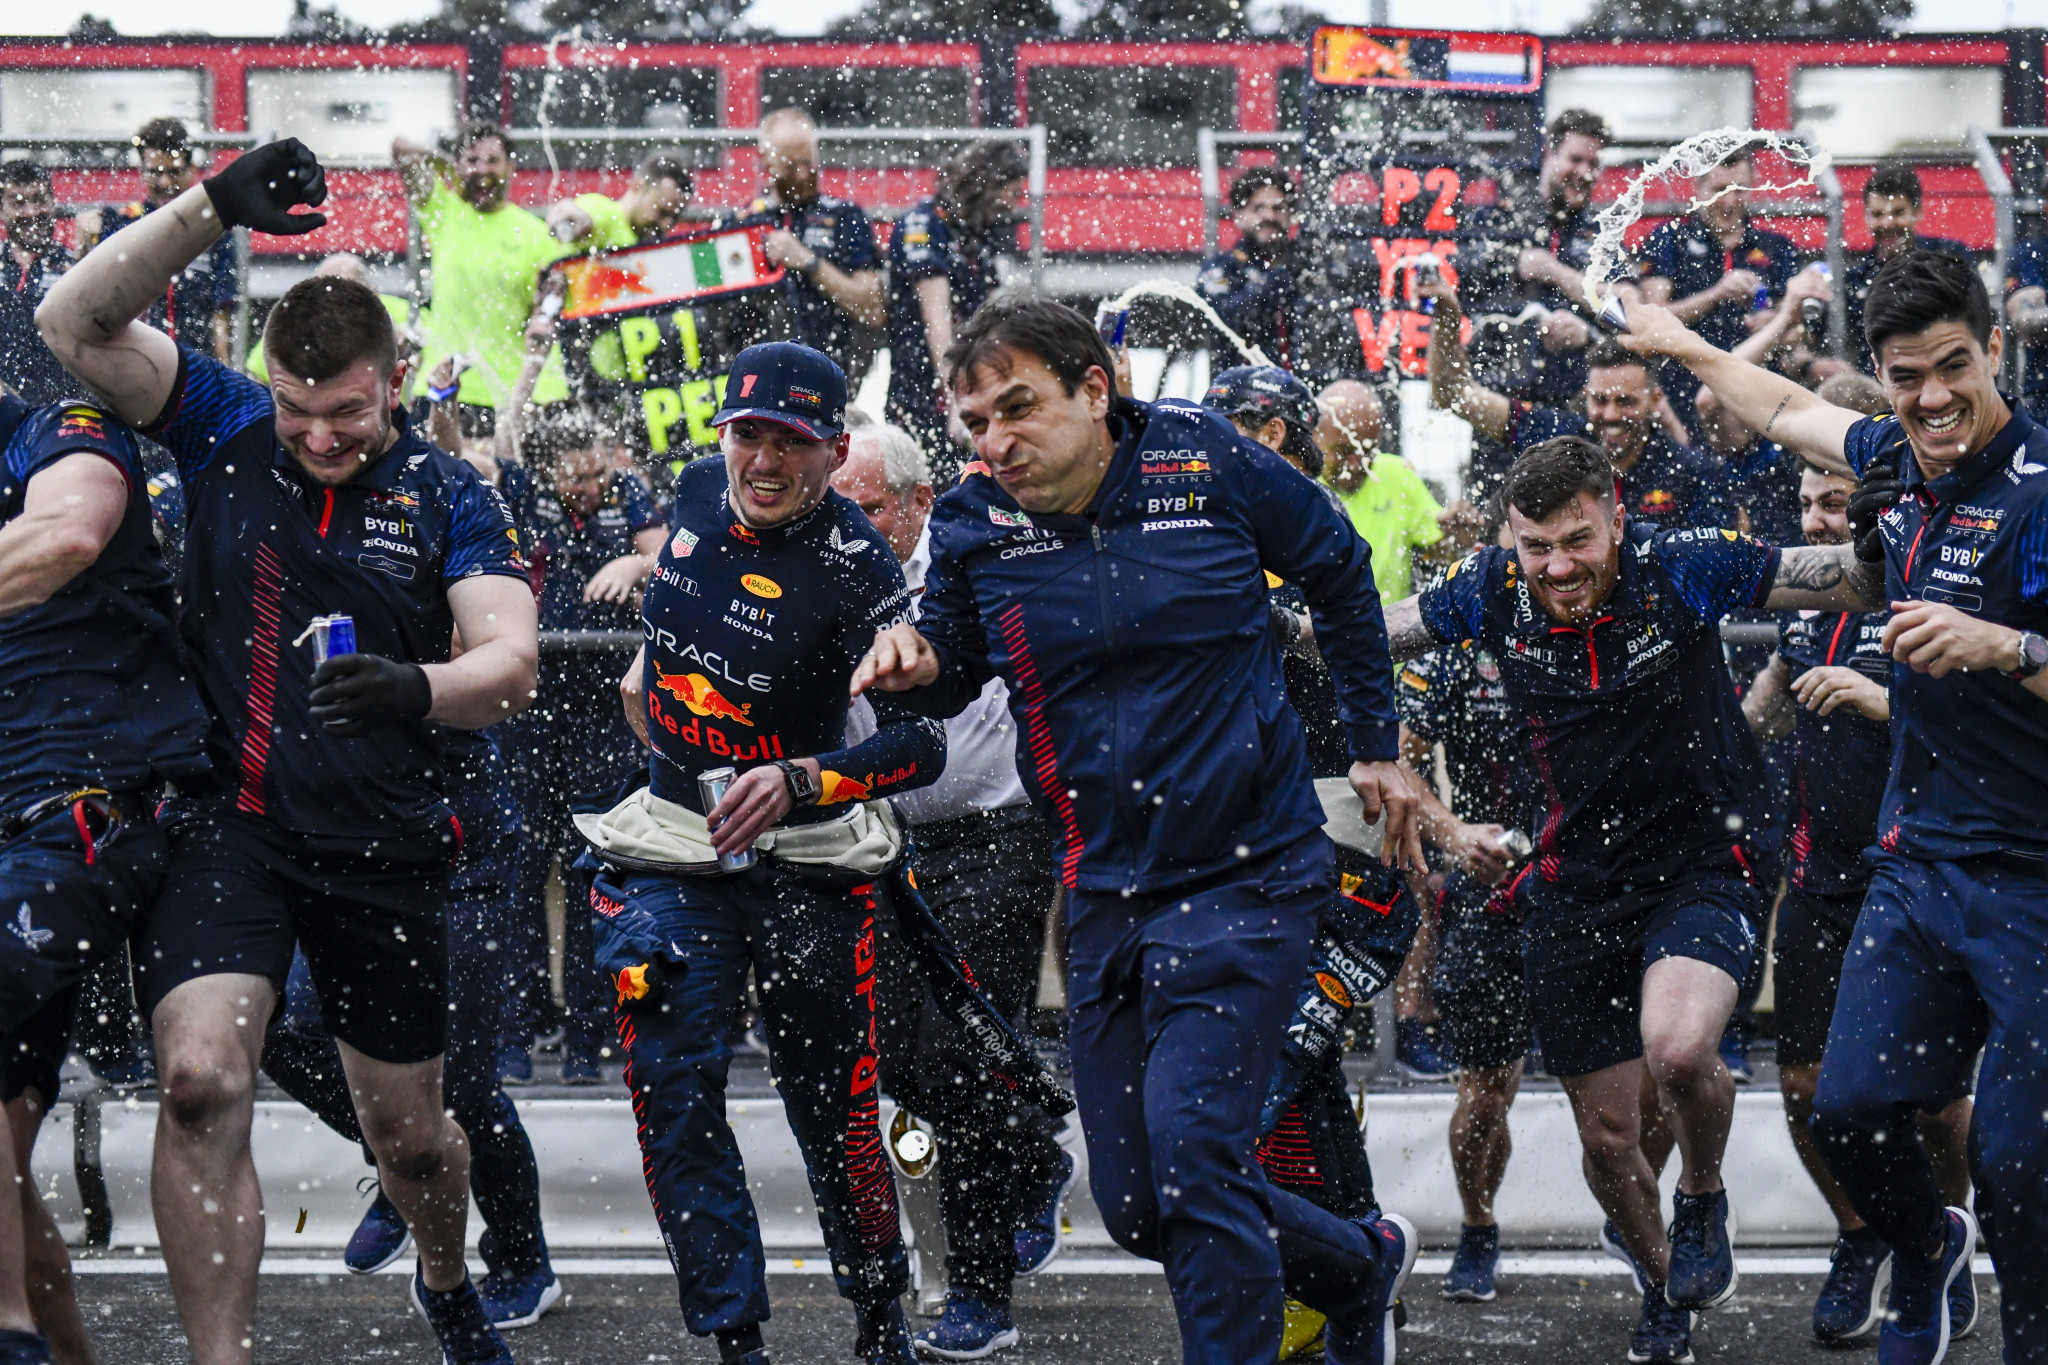 Red Bull travel to the United States next for the Miami Grand Prix, scheduled to take place from May 5 to 7, where they will look to continue their dominance so far this season ©Getty Images